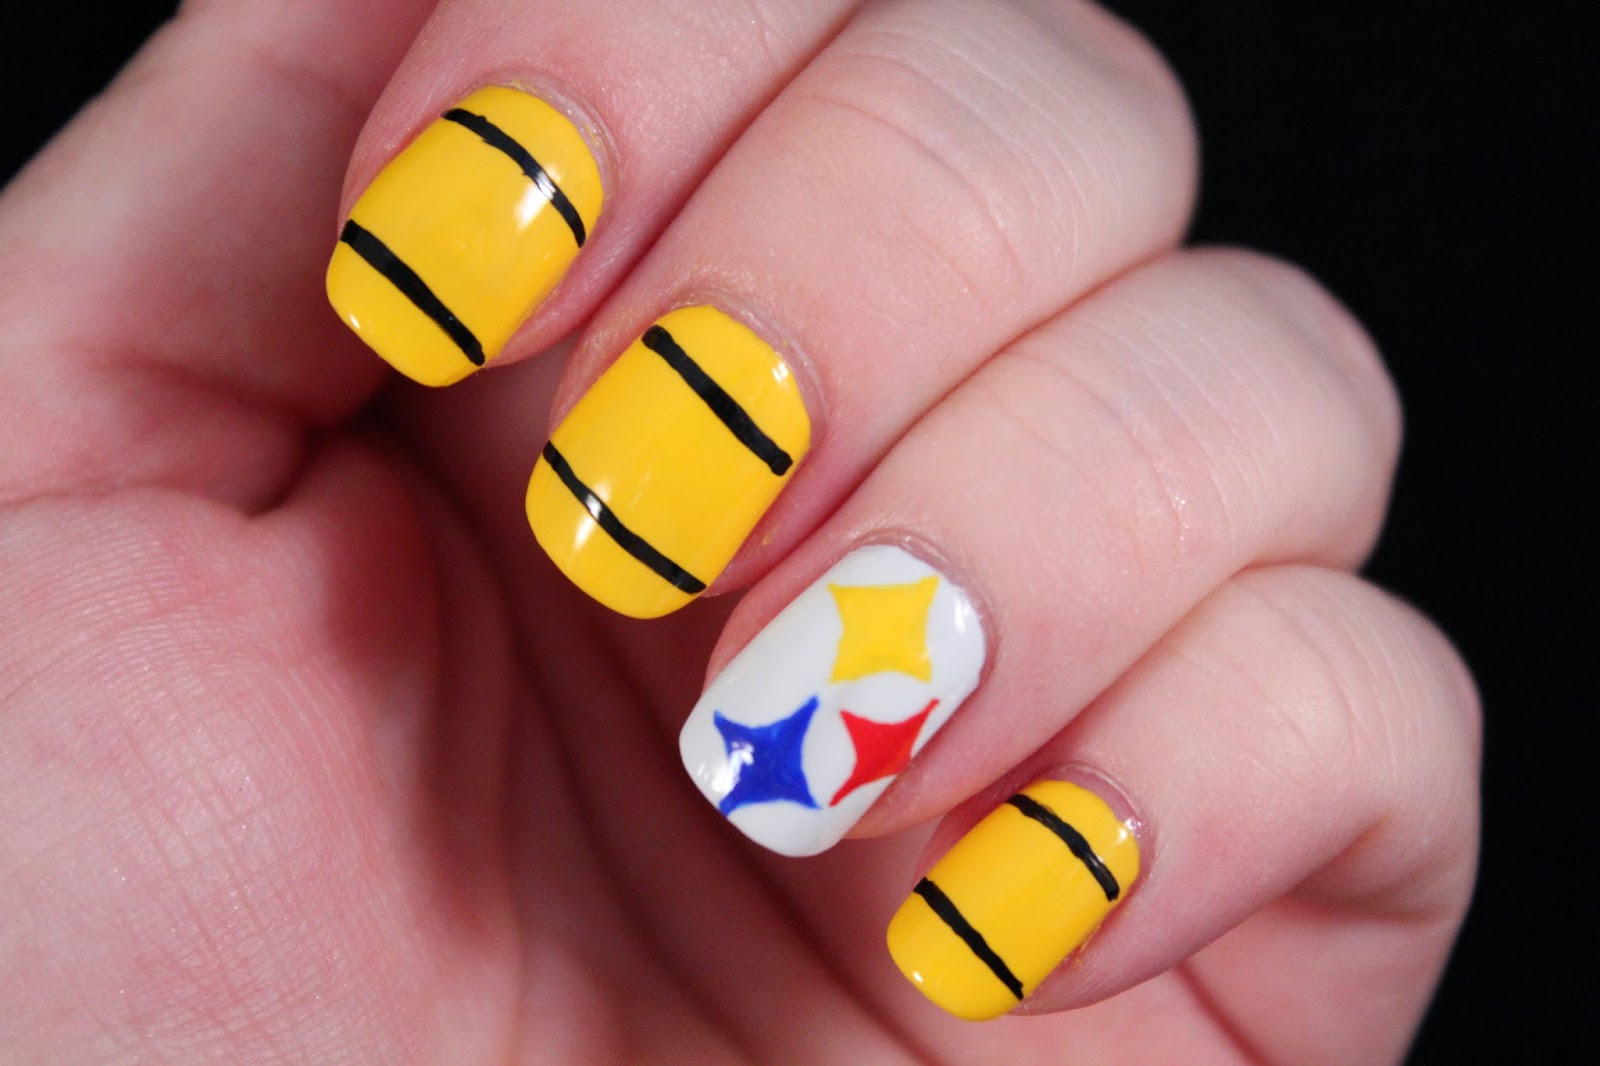 Pittsburgh Steelers Nail Designs
 Glimpses of the Moon Steelers Nail Art Tutorial